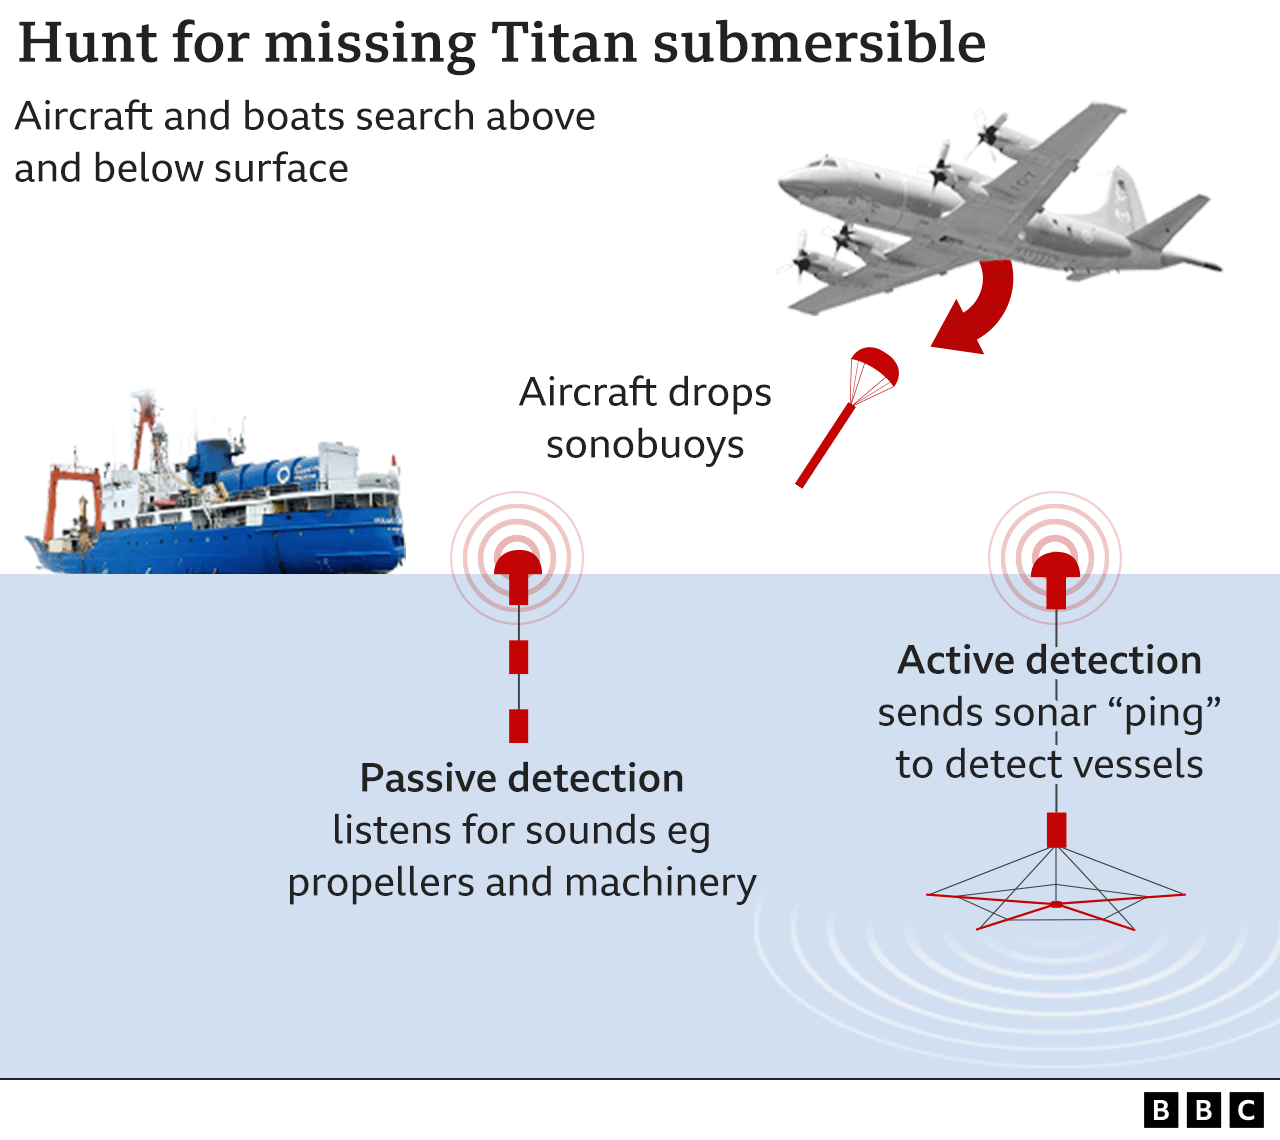 Graphic showing passive underwater detection and active detection using sonar